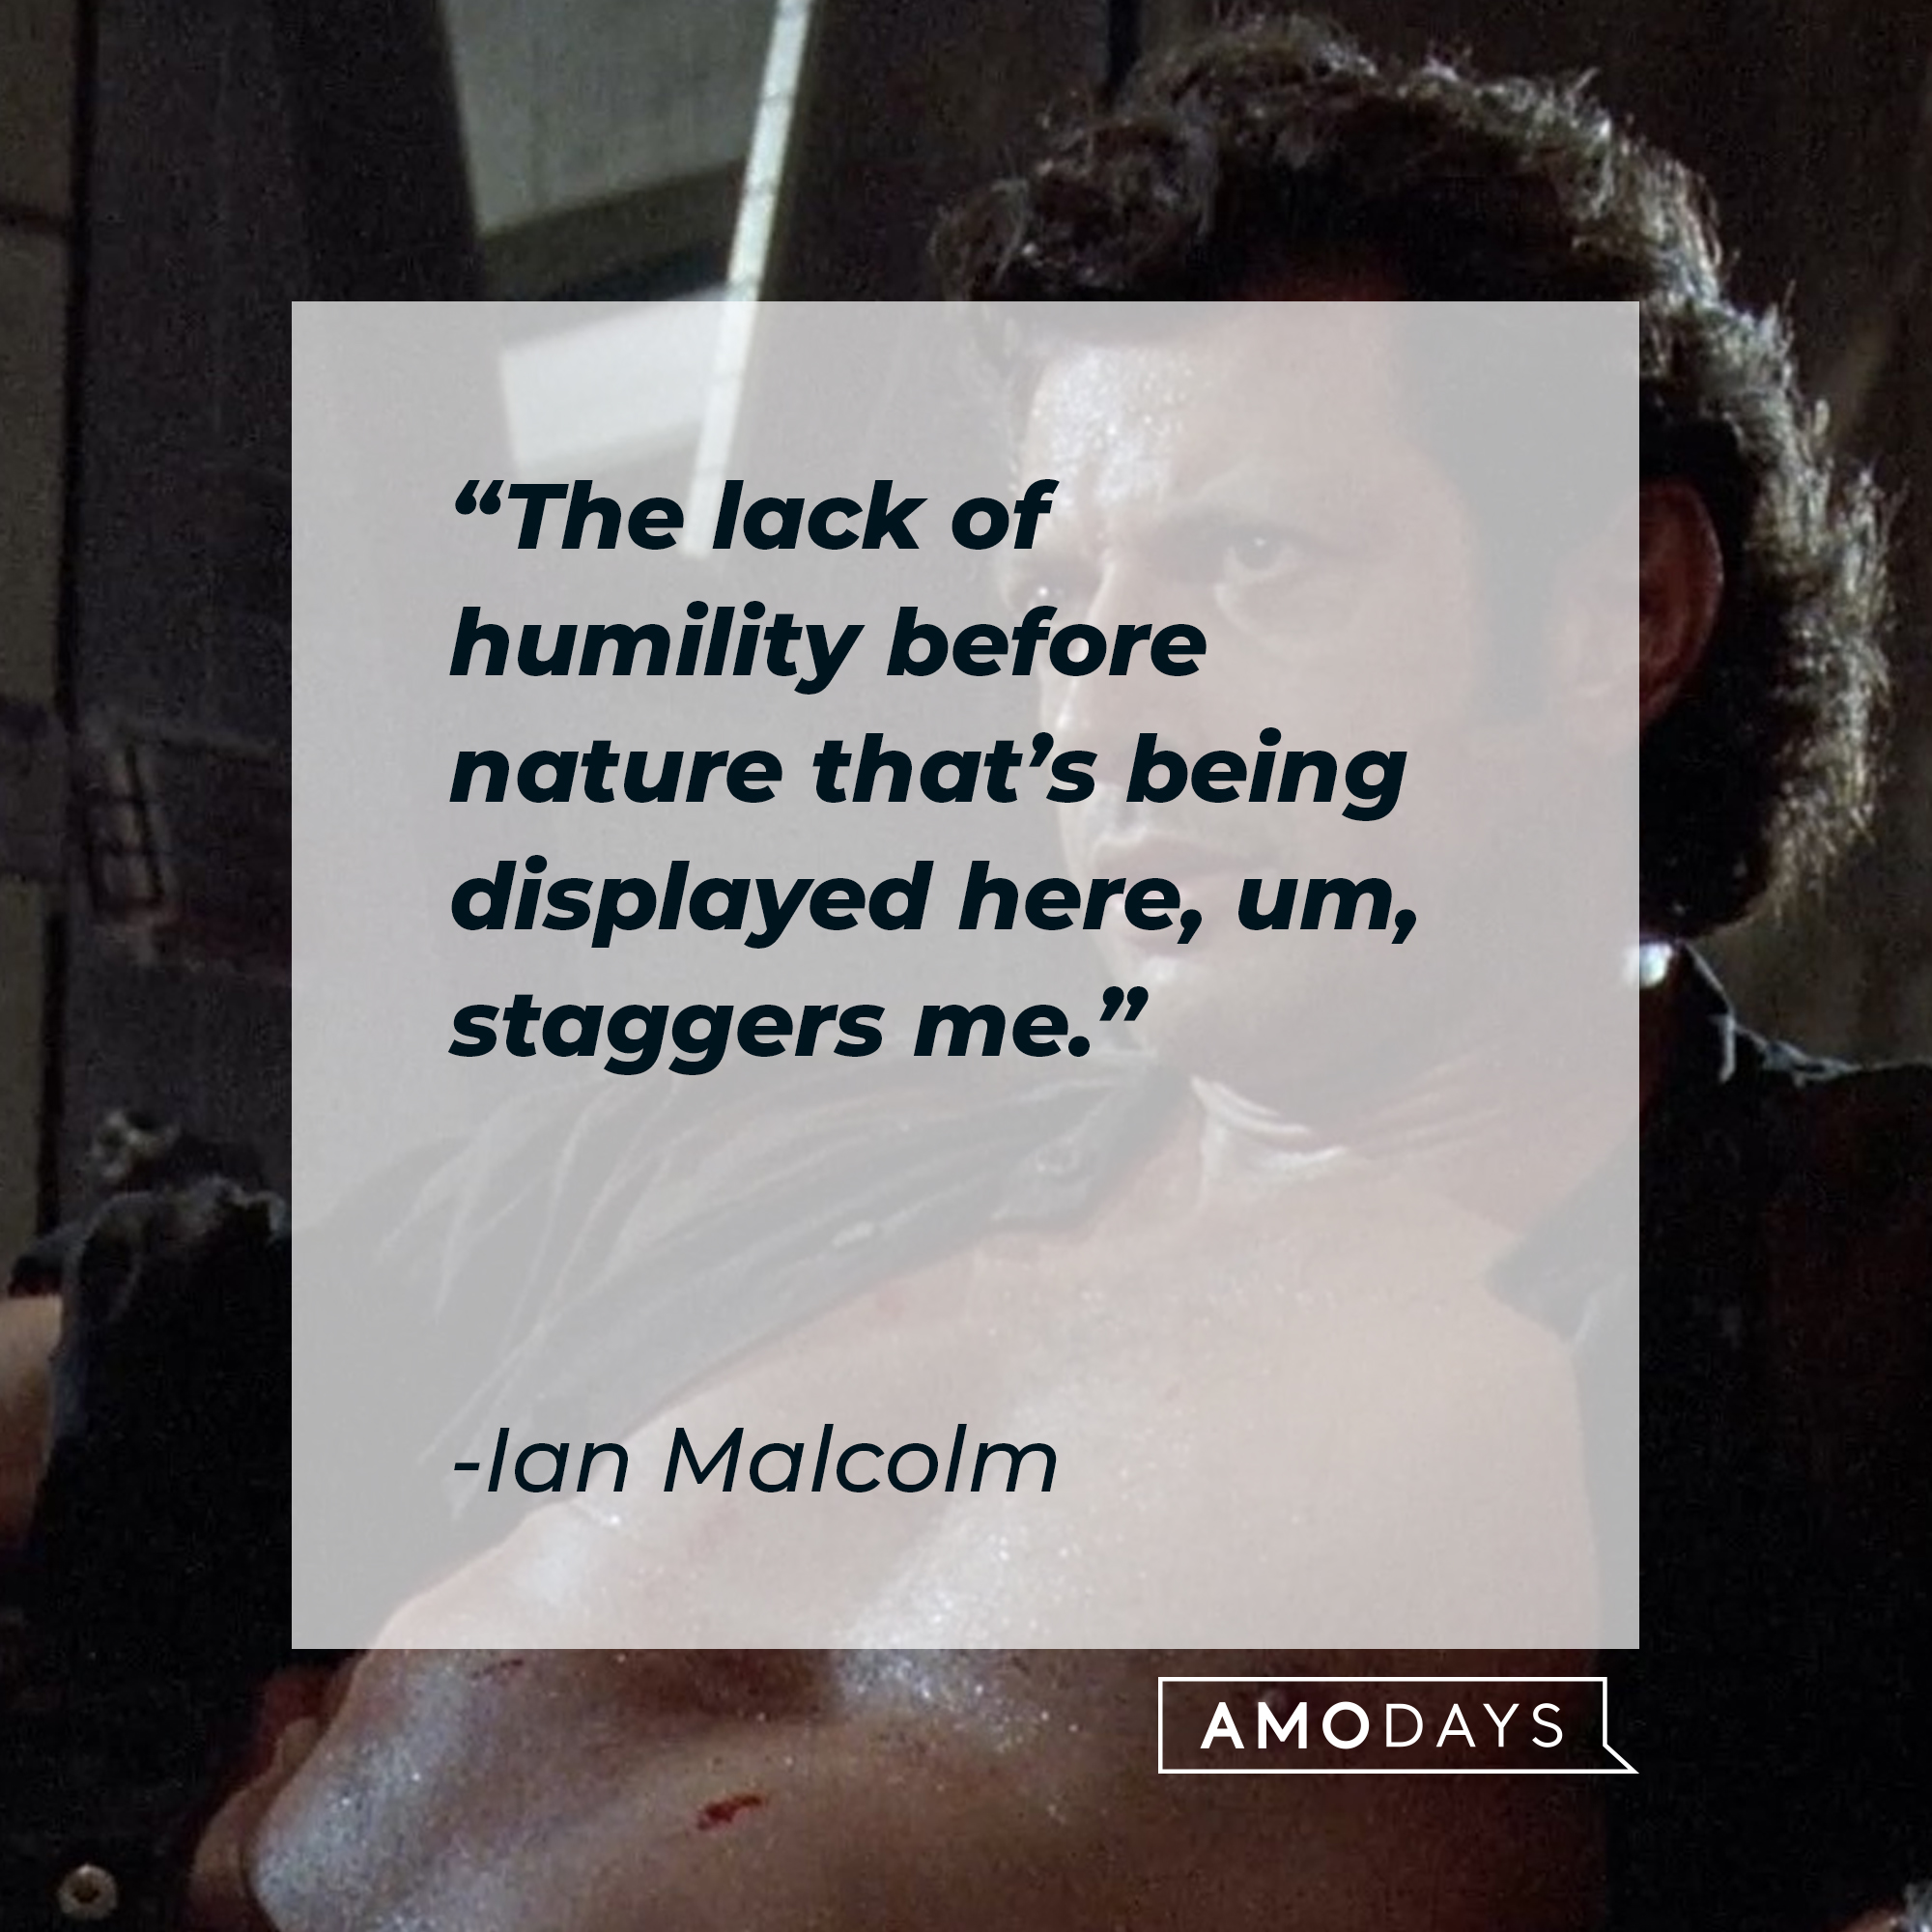 An image of Ian Malcolm with his quote: “The lack of humility before nature that’s being displayed here, um, staggers me.” | Source: Facebook.com/JurassicWorld